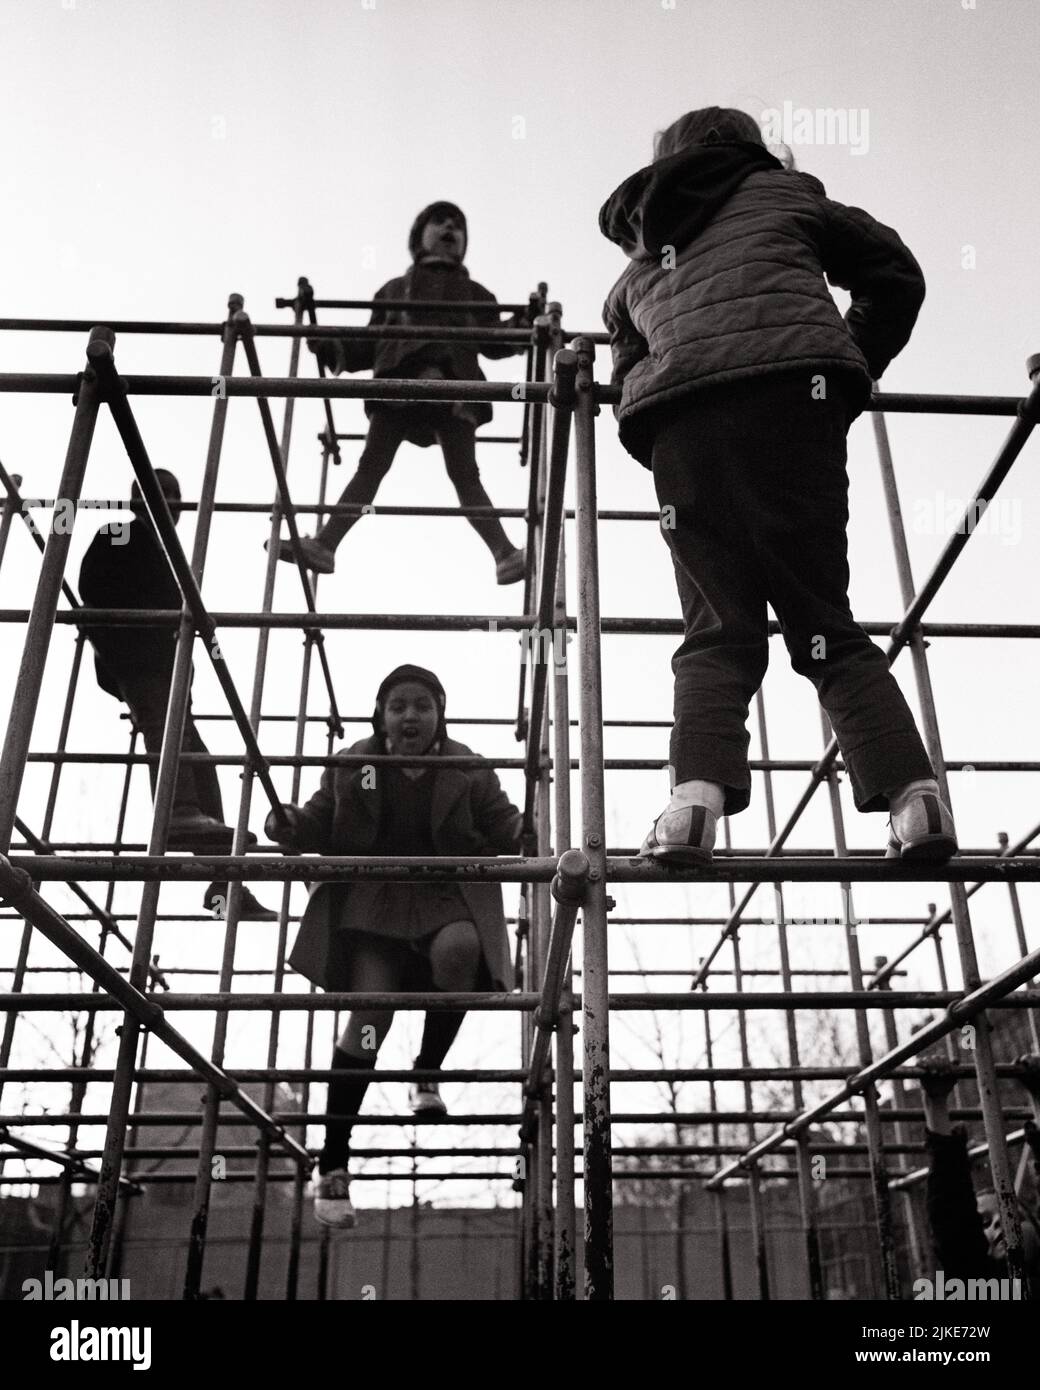 1970s SILHOUETTED KIDS 2 BOYS AND 2 GIRLS PLAYING CLIMBING ON PLAYGROUND JUNGLE GYM - j13231 HAR001 HARS FEMALES COATS COPY SPACE FRIENDSHIP FULL-LENGTH PHYSICAL FITNESS PERSONS MALES SILHOUETTES B&W OUTLINE SUCCESS ACTIVITY PHYSICAL SCHOOLYARD ADVENTURE STRENGTH SILHOUETTED AND EXCITEMENT LOW ANGLE PRIDE SCHOOL YARD FLEXIBILITY FRIENDLY MUSCLES EARLY WINTER GROWTH LATE AUTUMN TOGETHERNESS BLACK AND WHITE HAR001 JACKETS JUNGLE GYM OLD FASHIONED Stock Photo